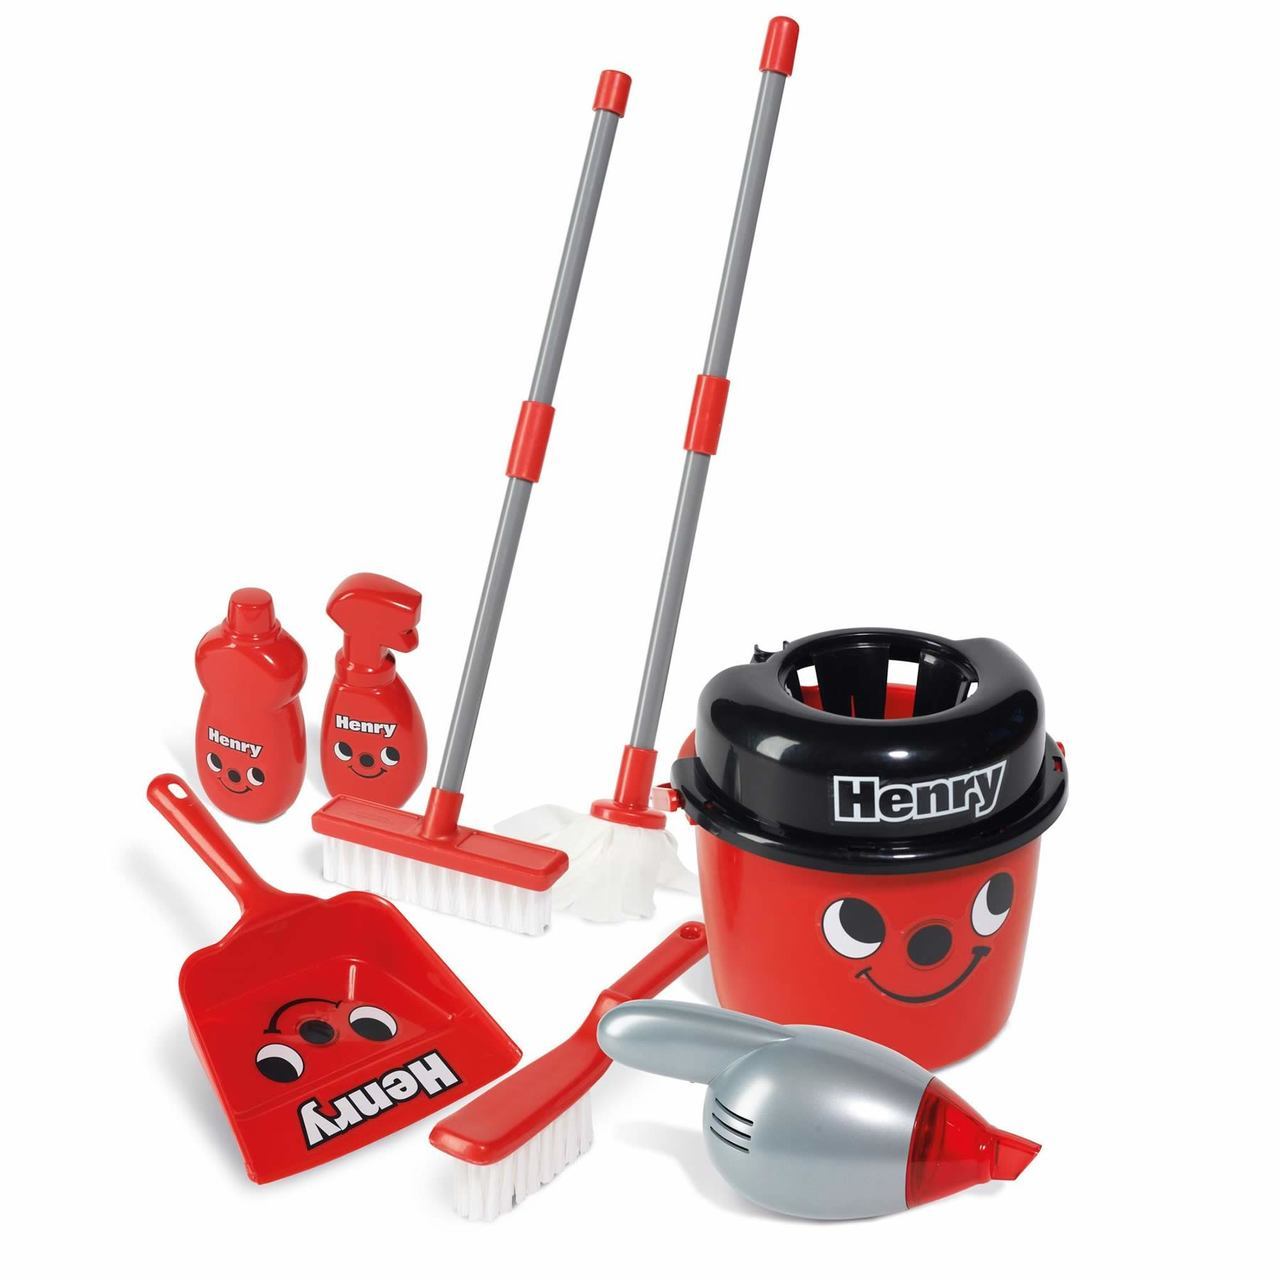 henry hoover toy cleaning trolley